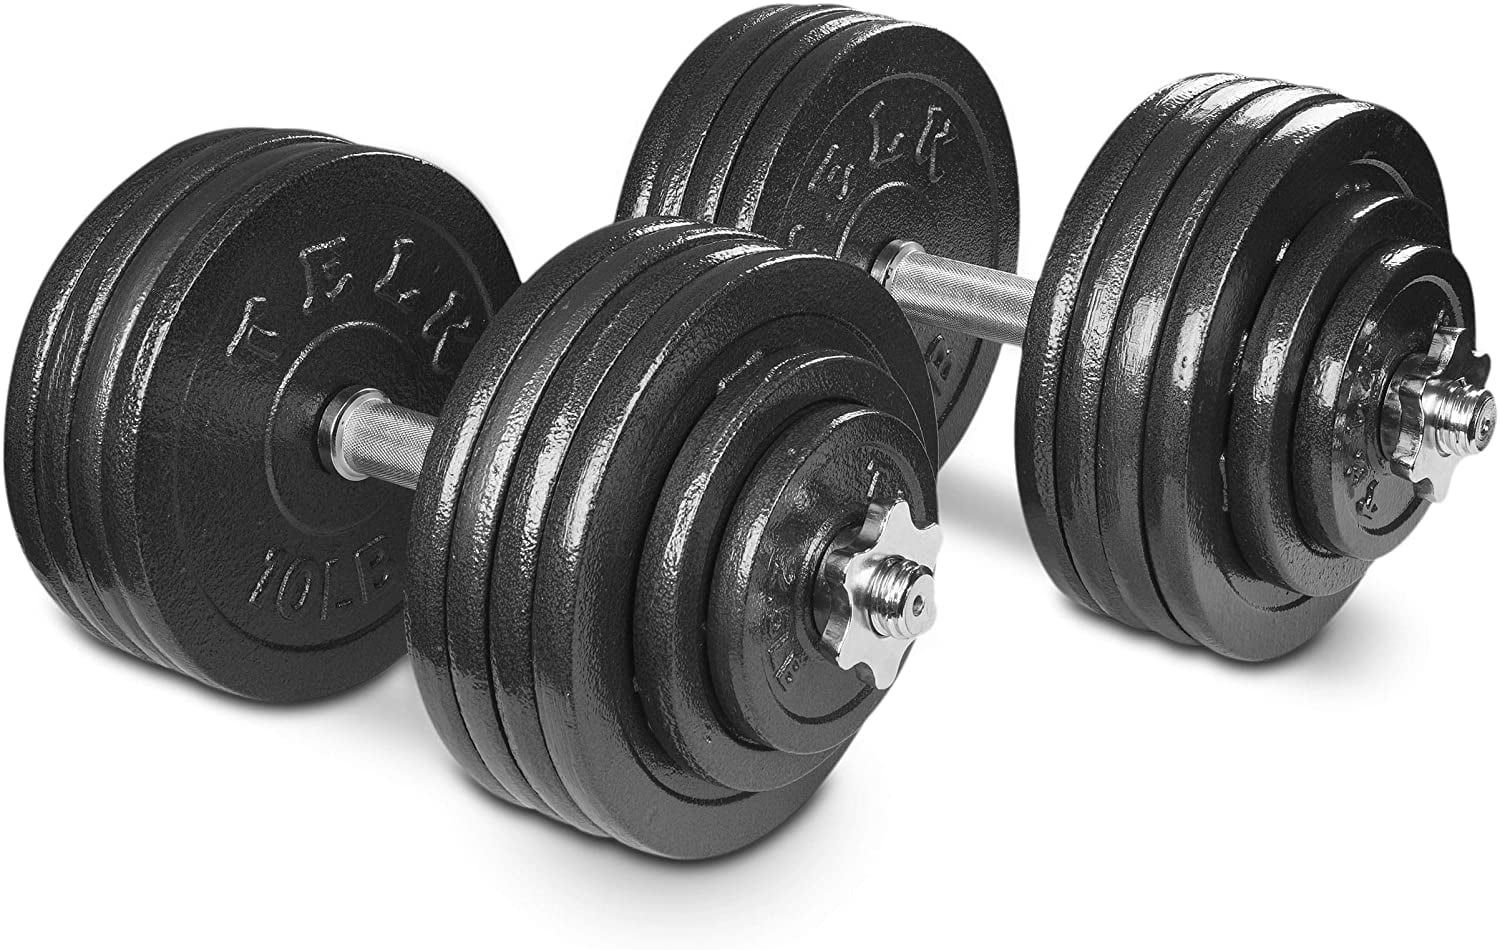 NEW Gold's Gym 40lb Vinyl Dumbbell Weight Set Adjustable *IN HAND SHIPS TODAY* 